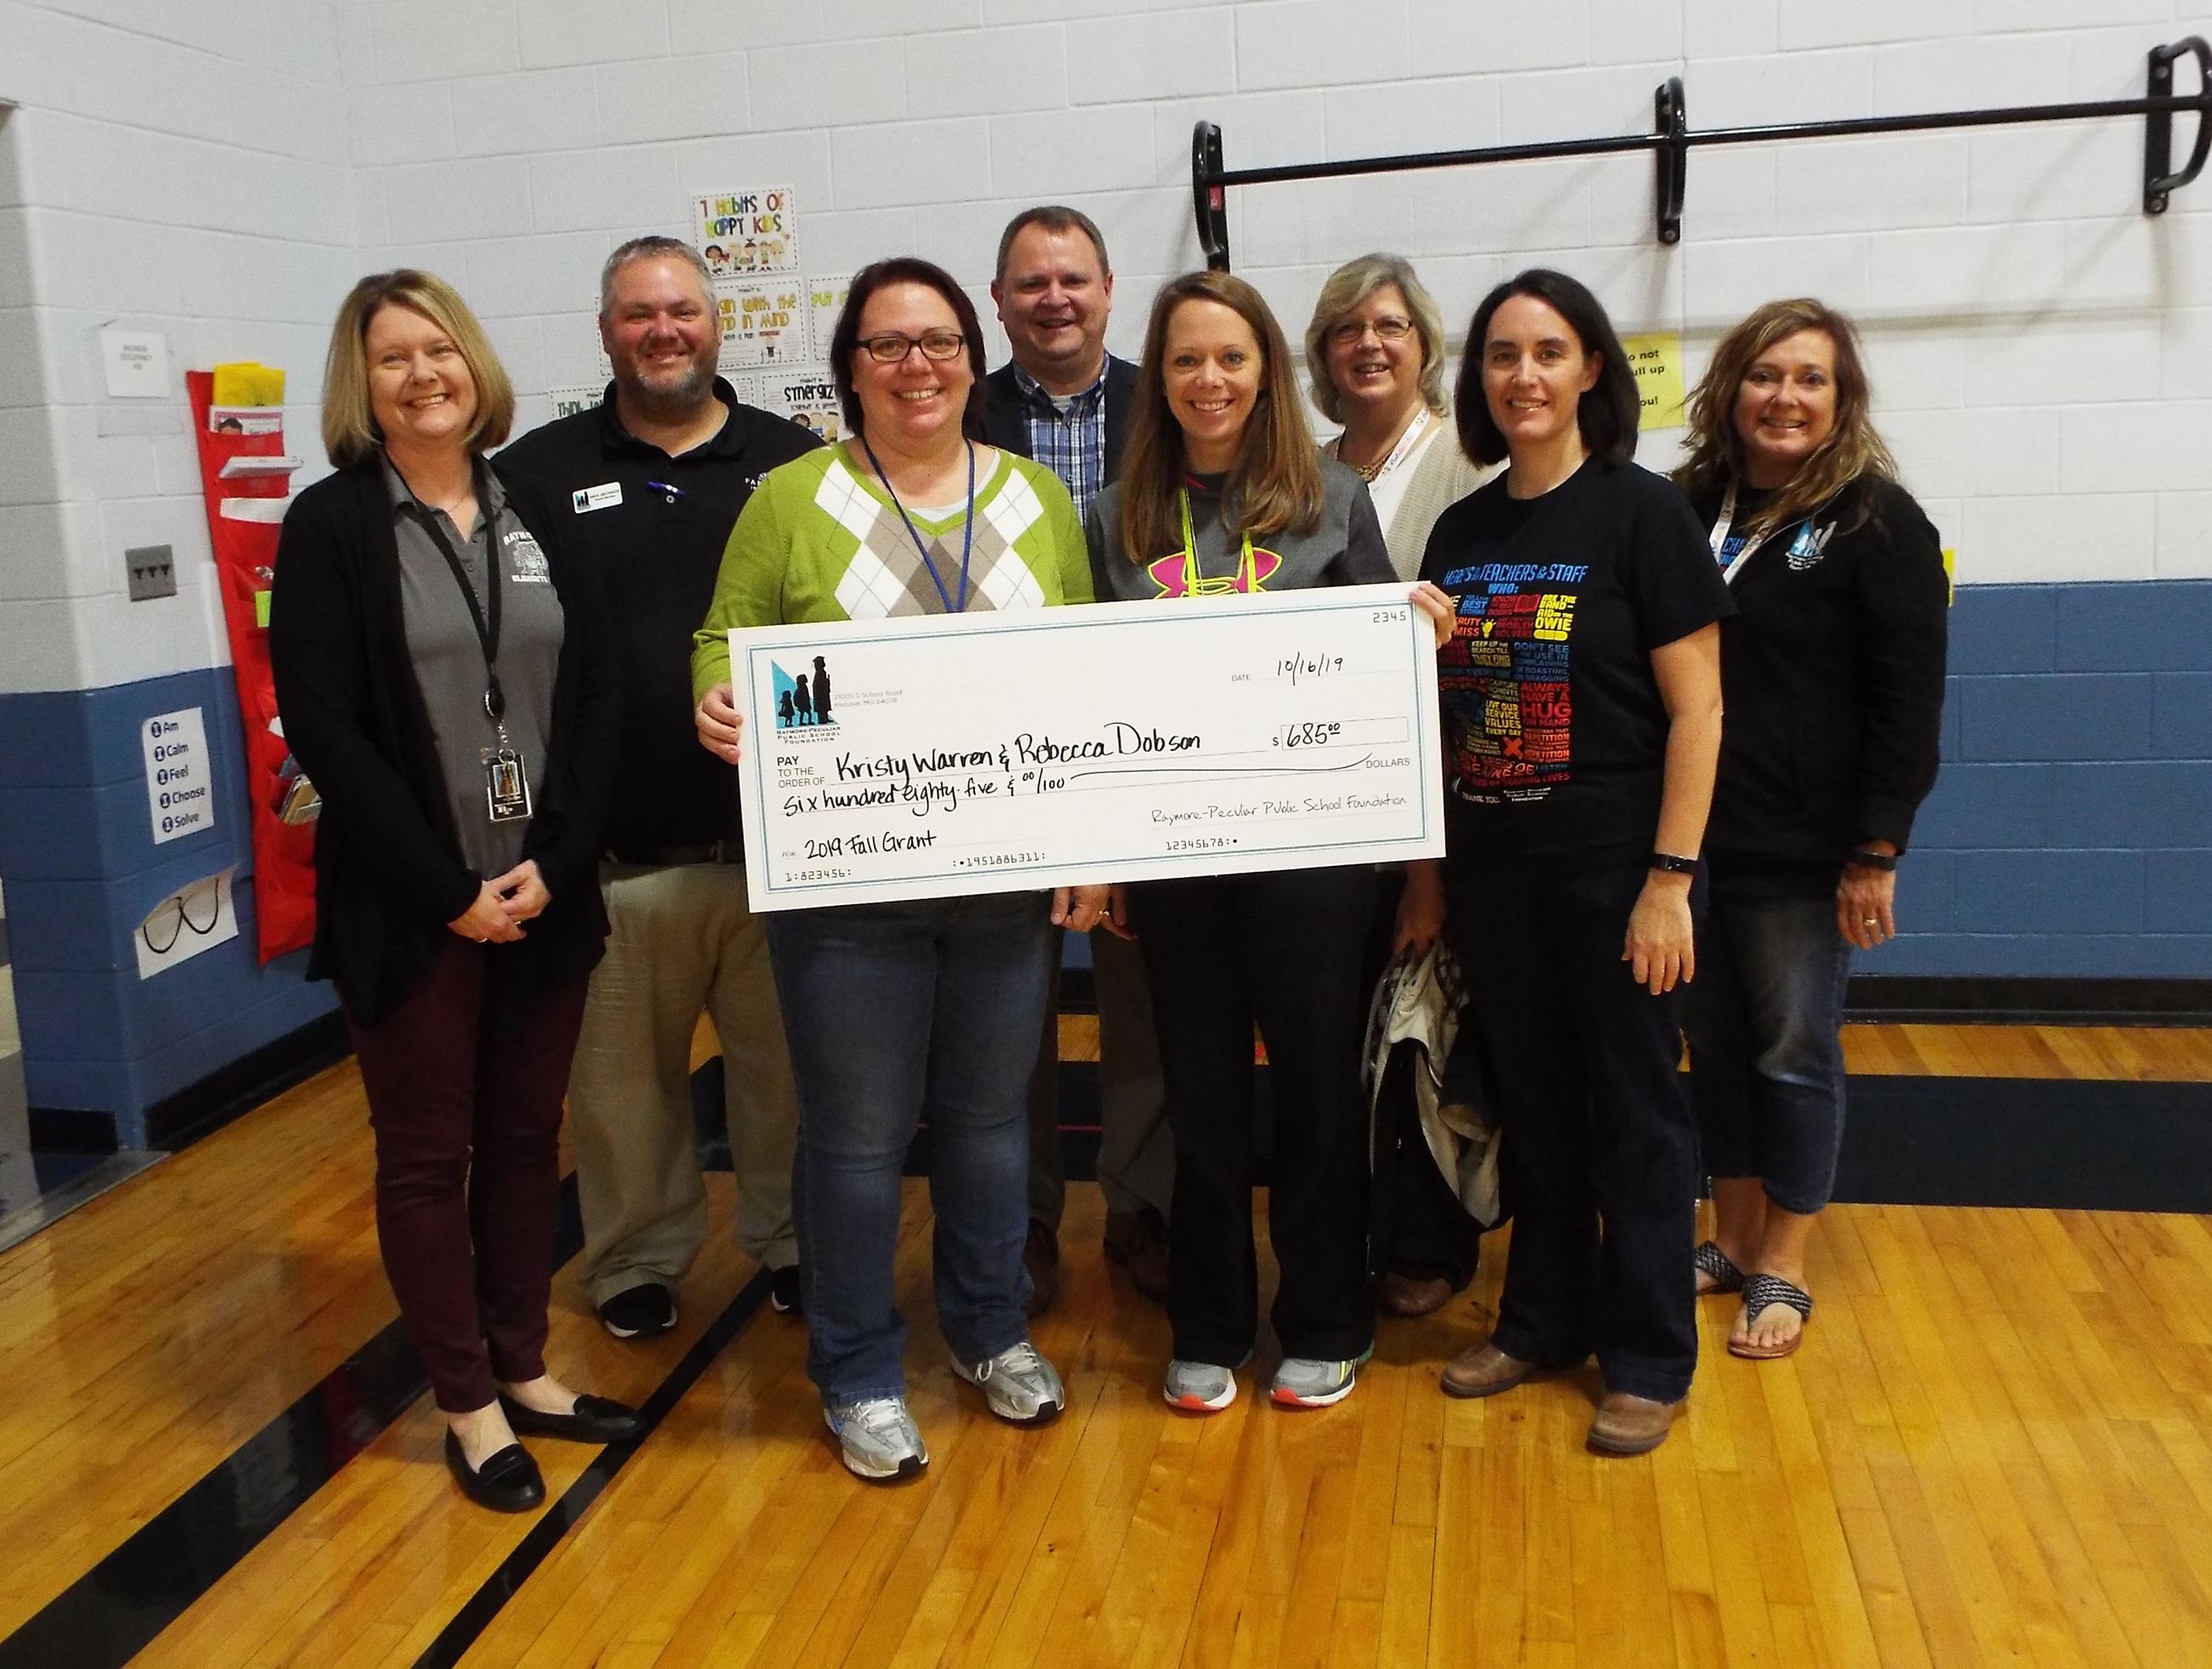 Kristy Warren and Rebecca Dobson, received a $685 grant to purchase three tricycles to be used as part of the Positive Playground program. Warren is the Focus Facilitator. Dobson teaches physical education.